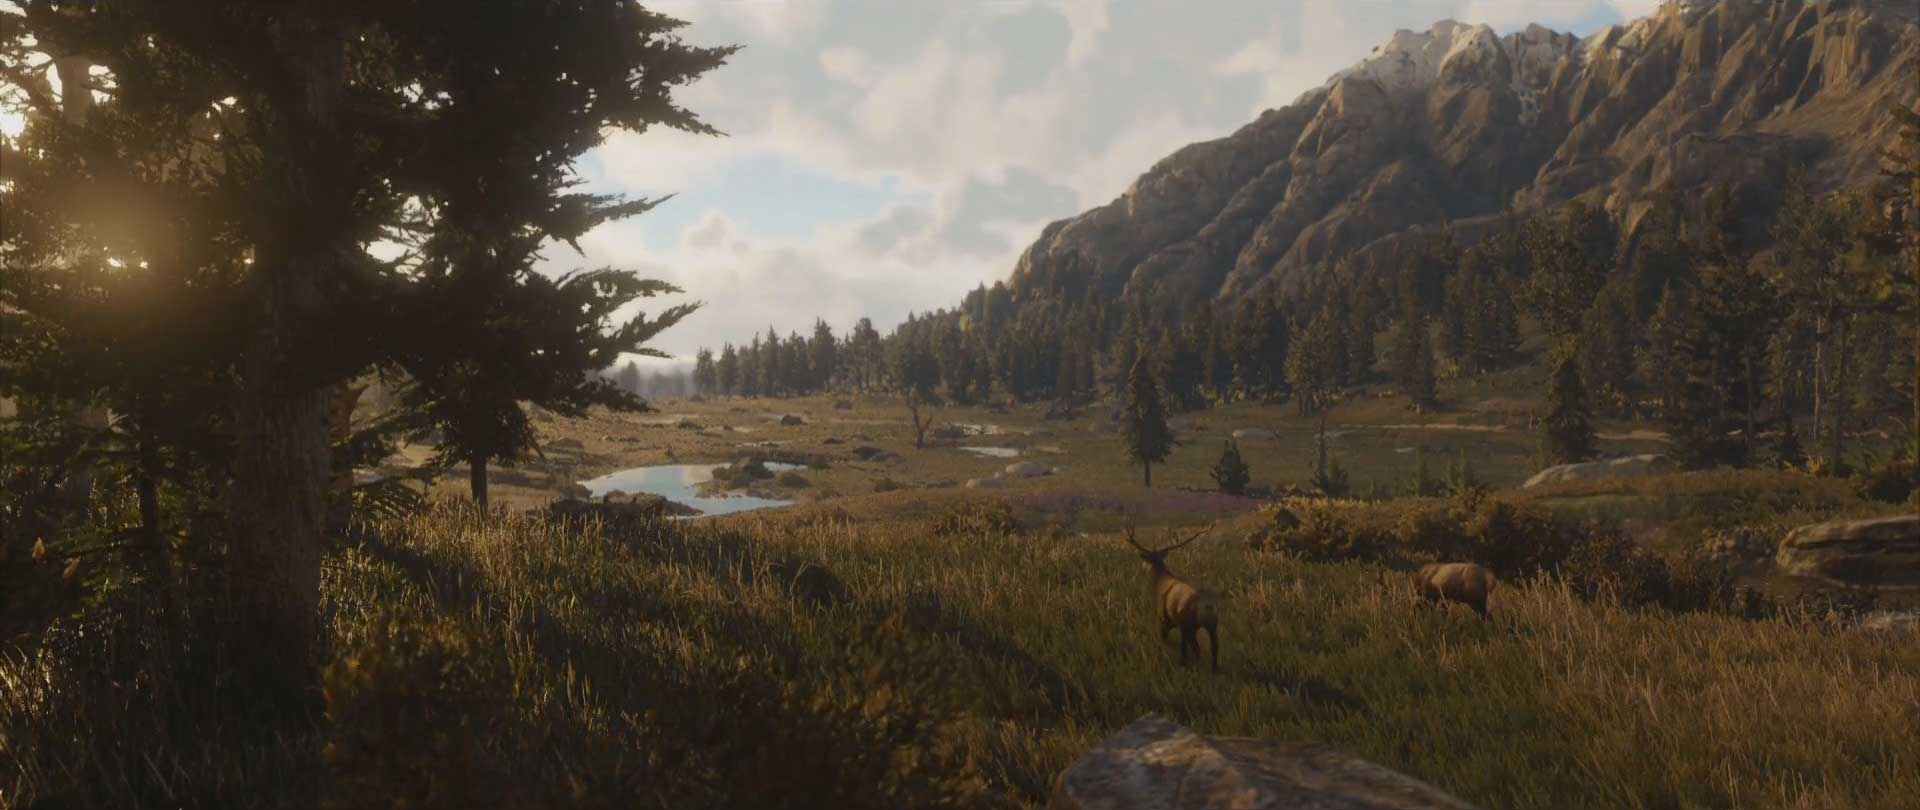 red_dead_redemption_2_trailer_screen_grab_mountains